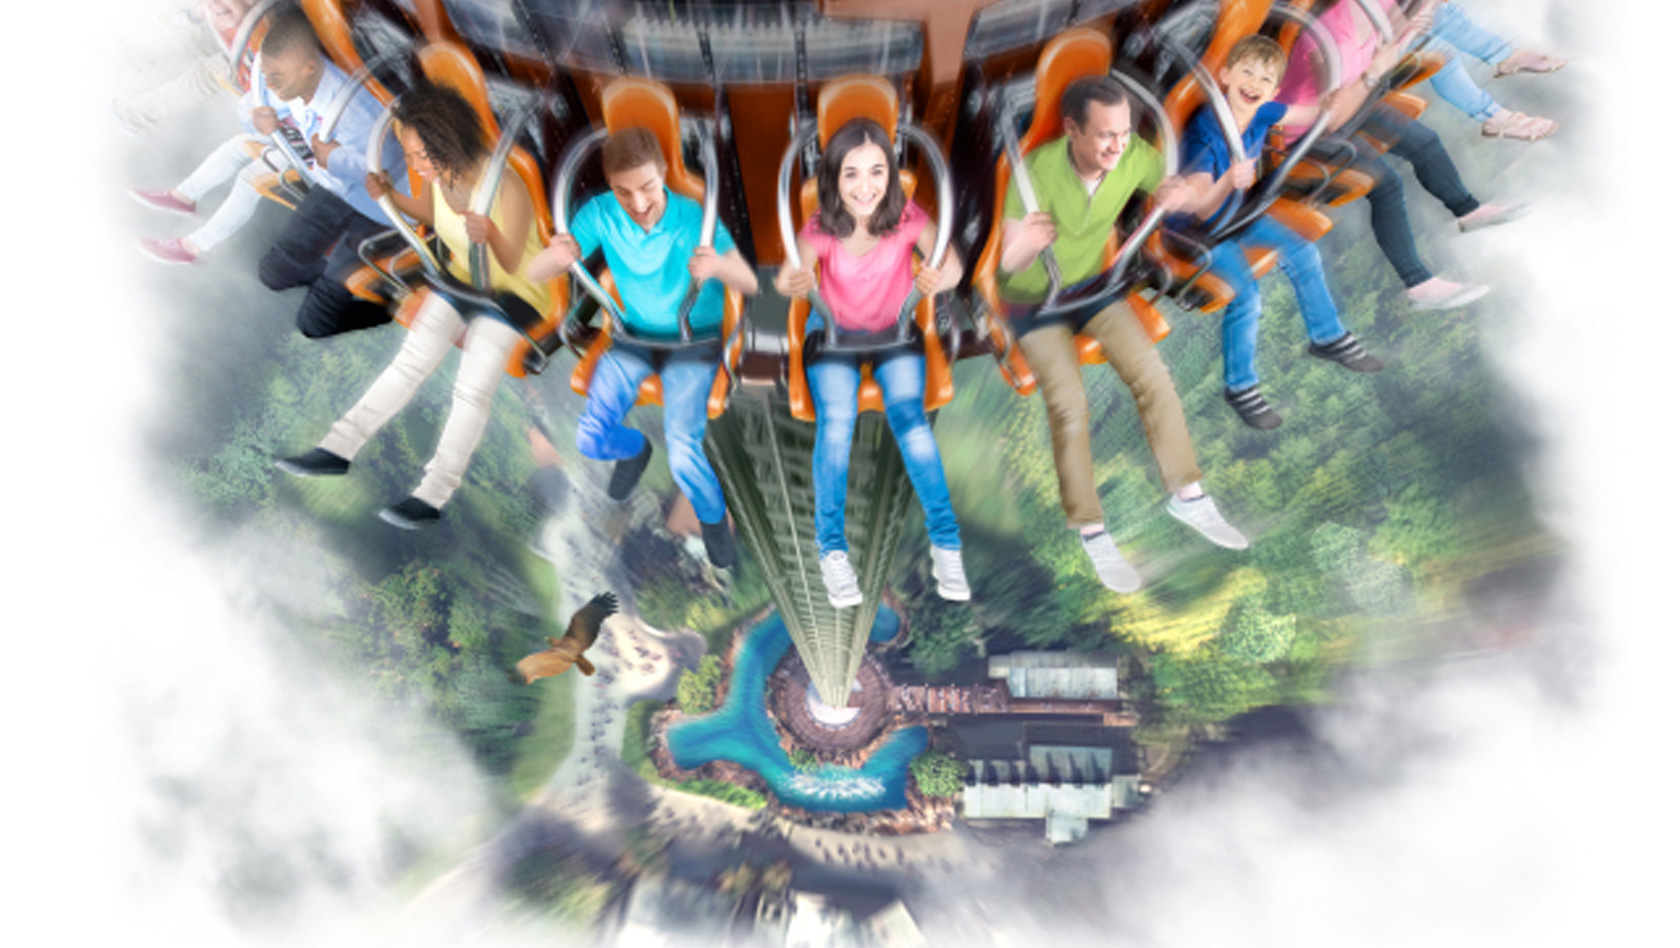 Dollywood Free-Fall-Tower Drop Line - Artwork